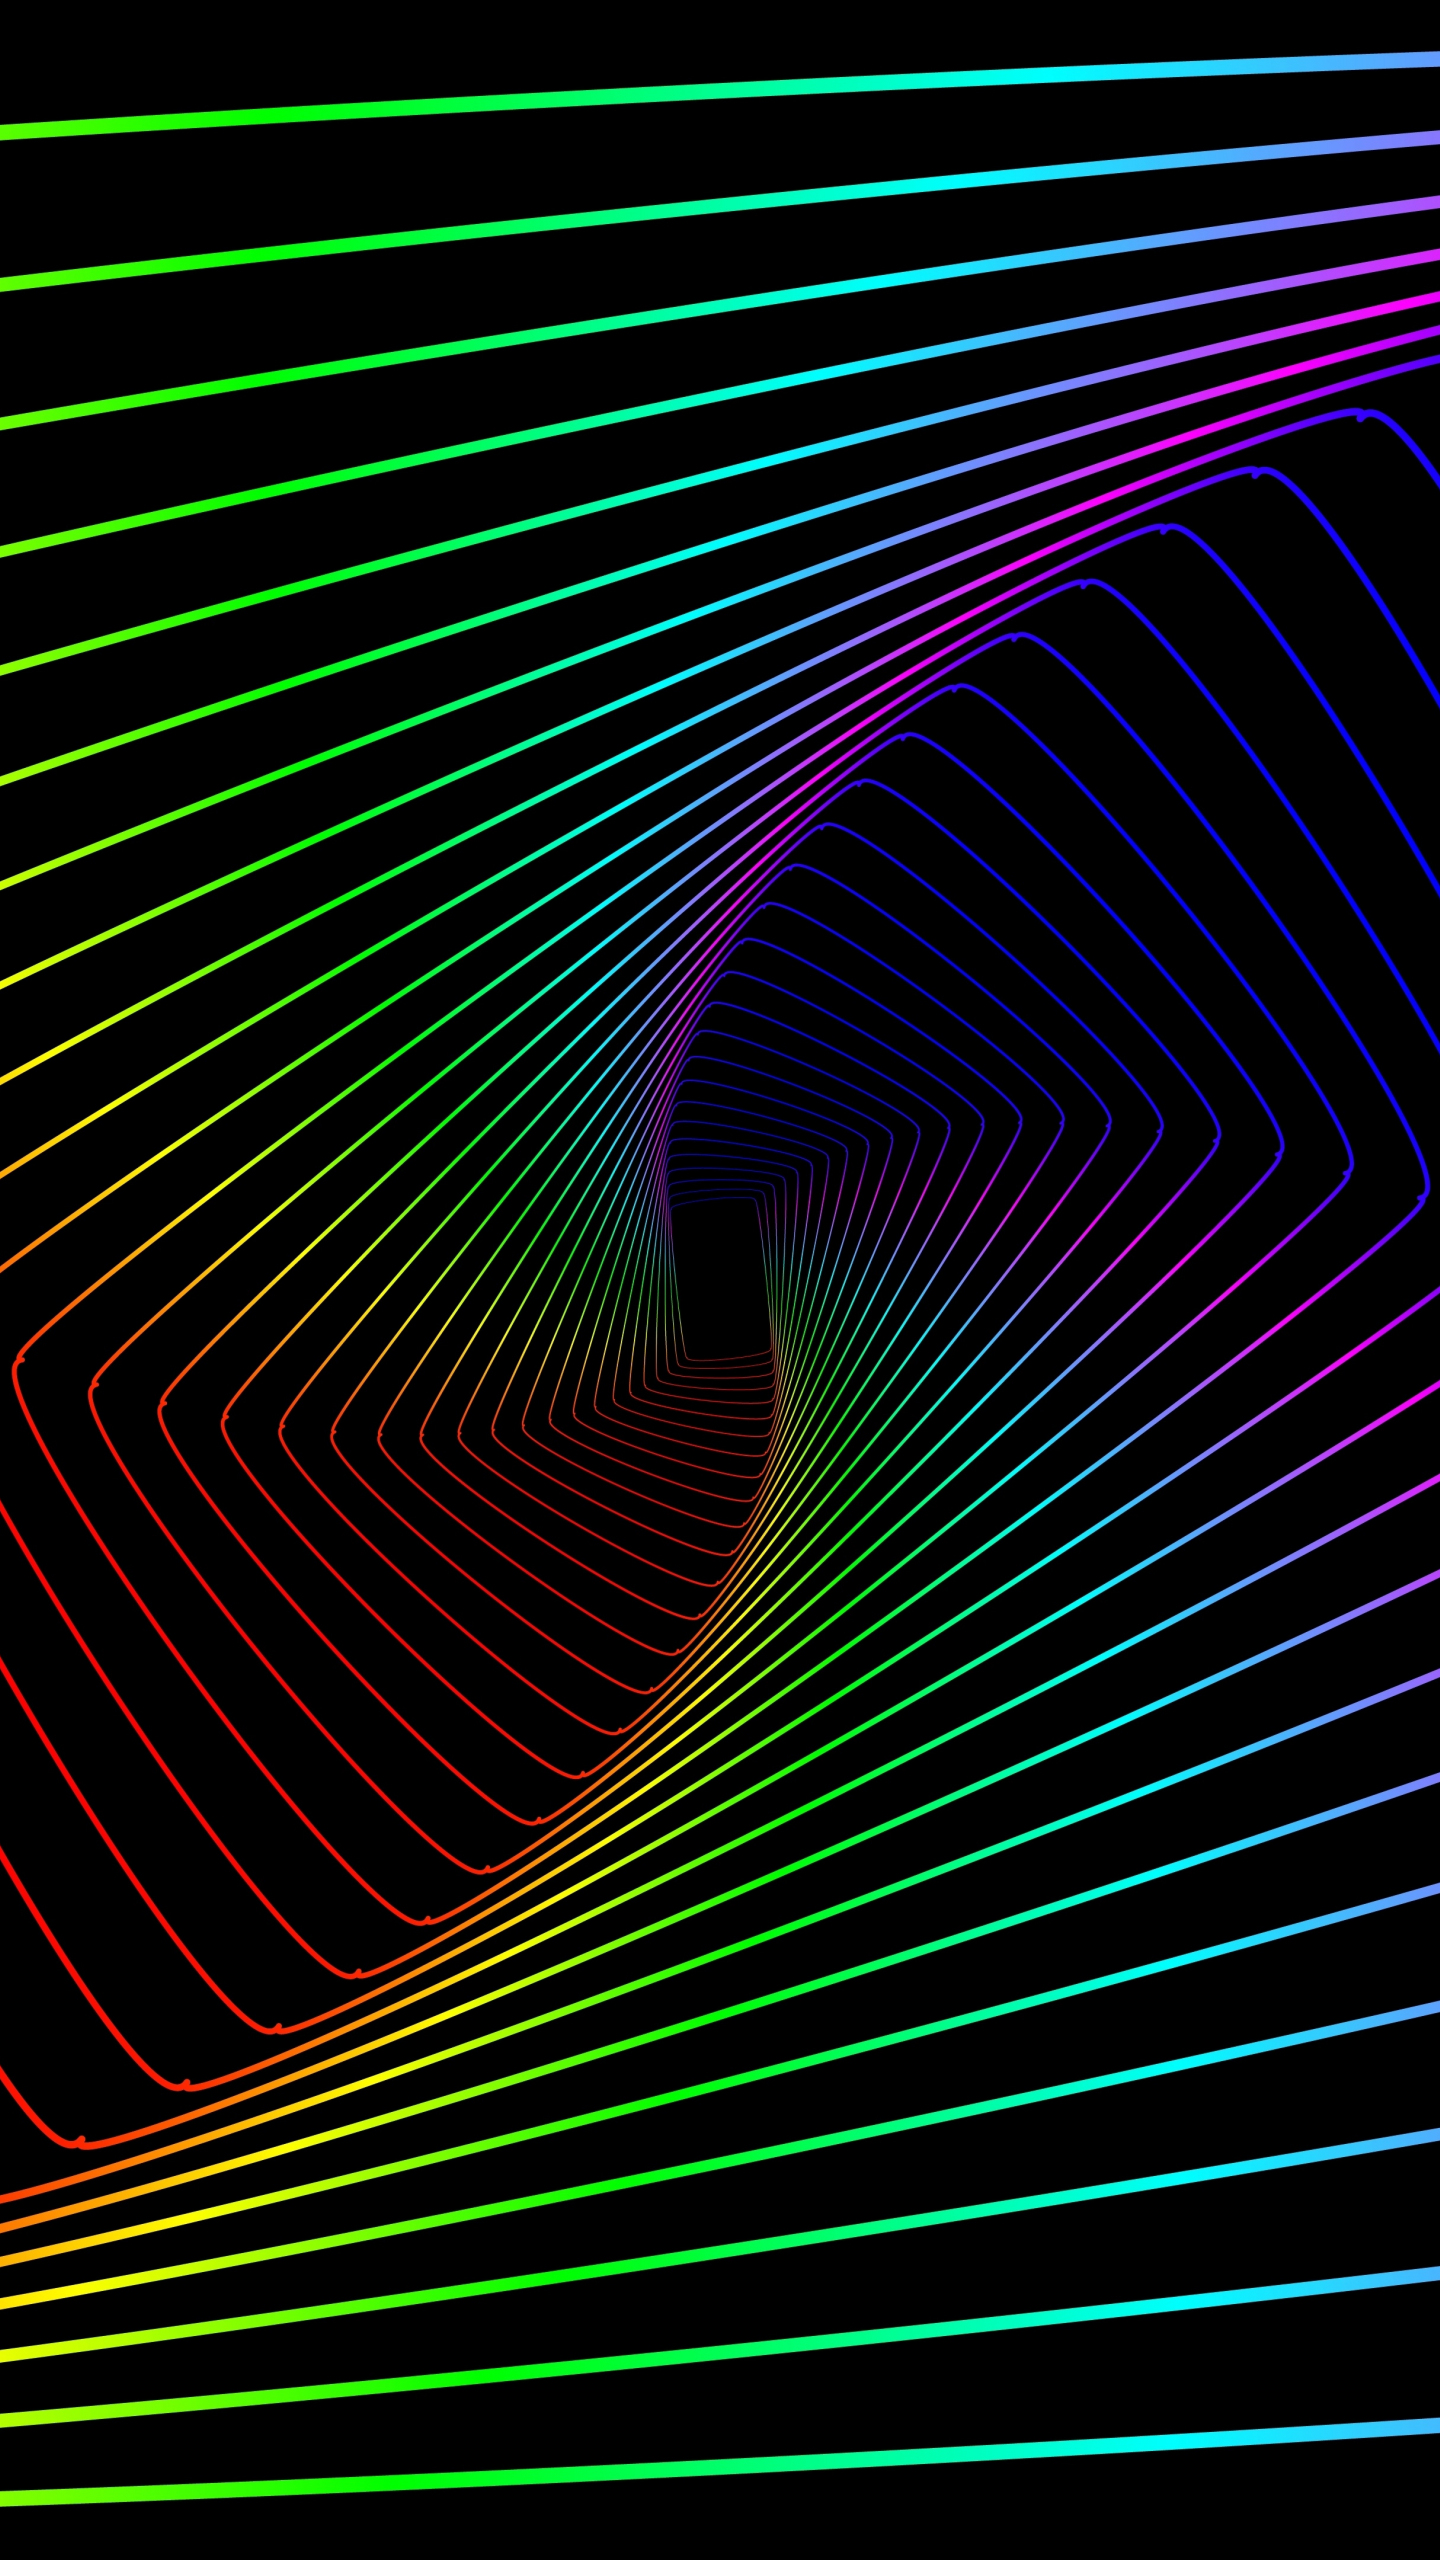 Download colorful lines, swirl, abstract, minimal 1440x2560 wallpaper, qhd samsung galaxy s s edge, note, lg g 1440x2560 HD image, background, 15002